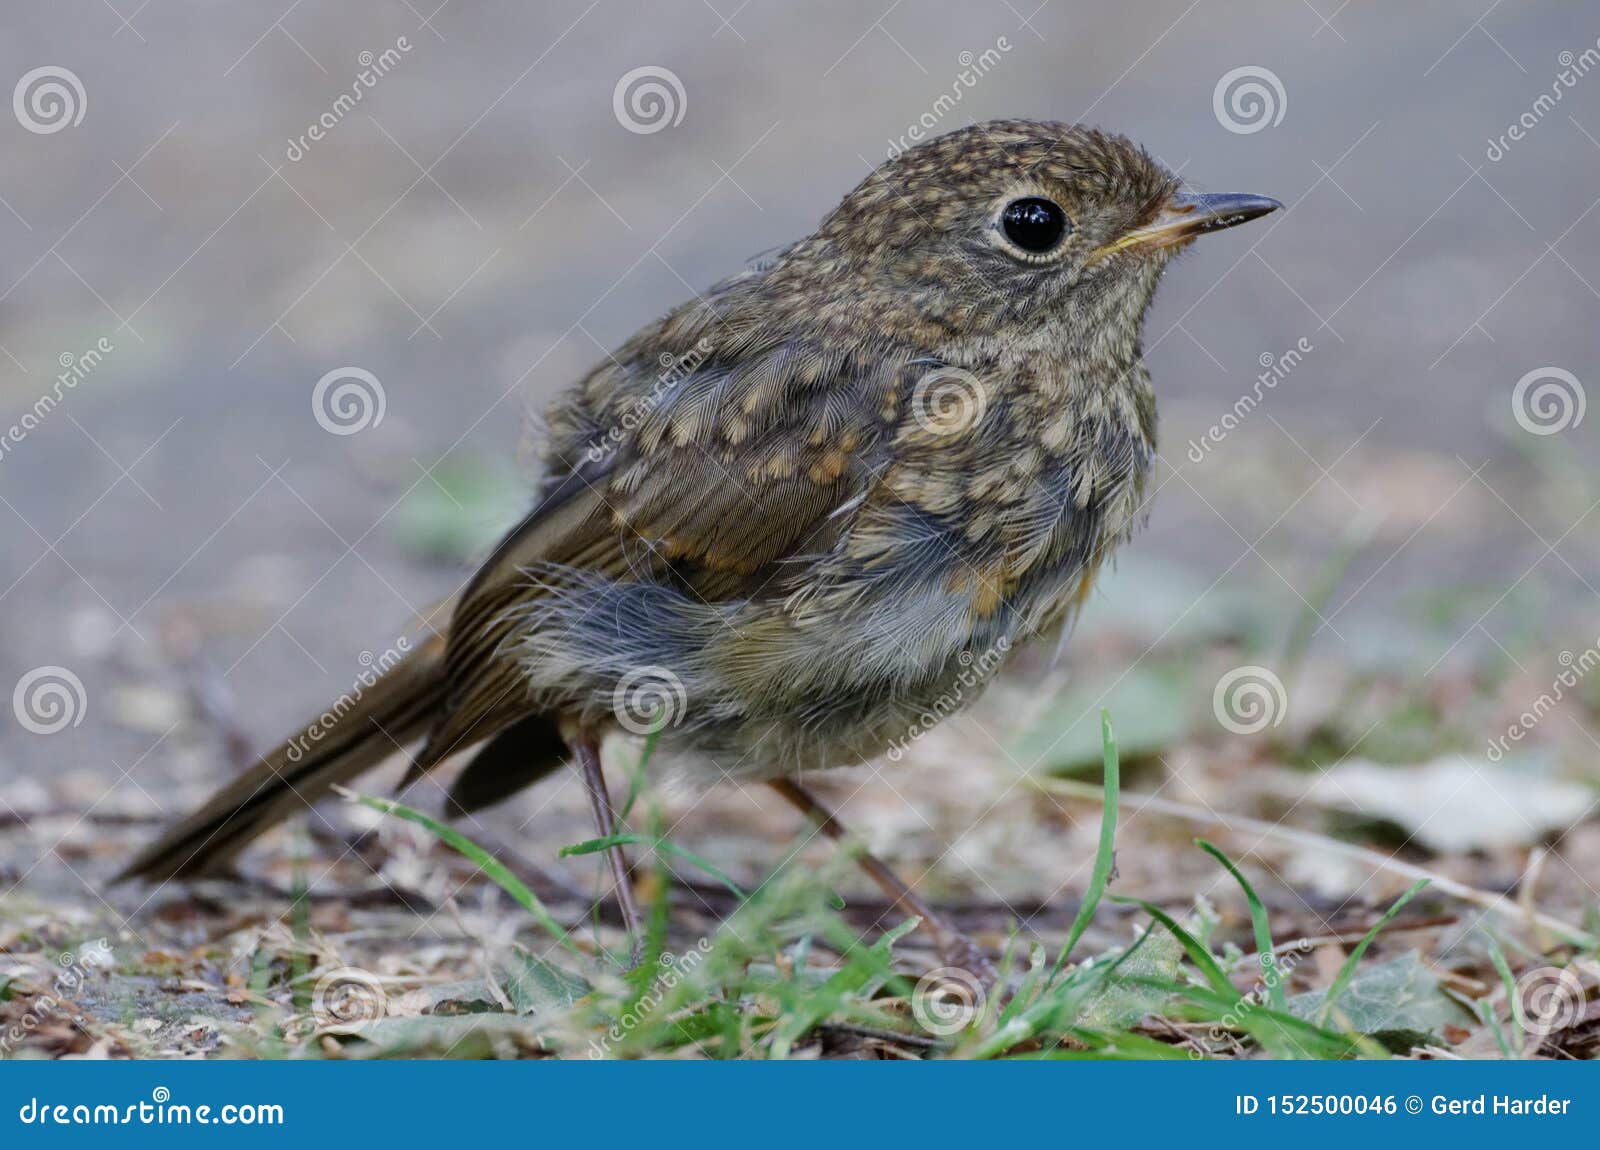 A young blackbird sits on a path in a park in Cologne